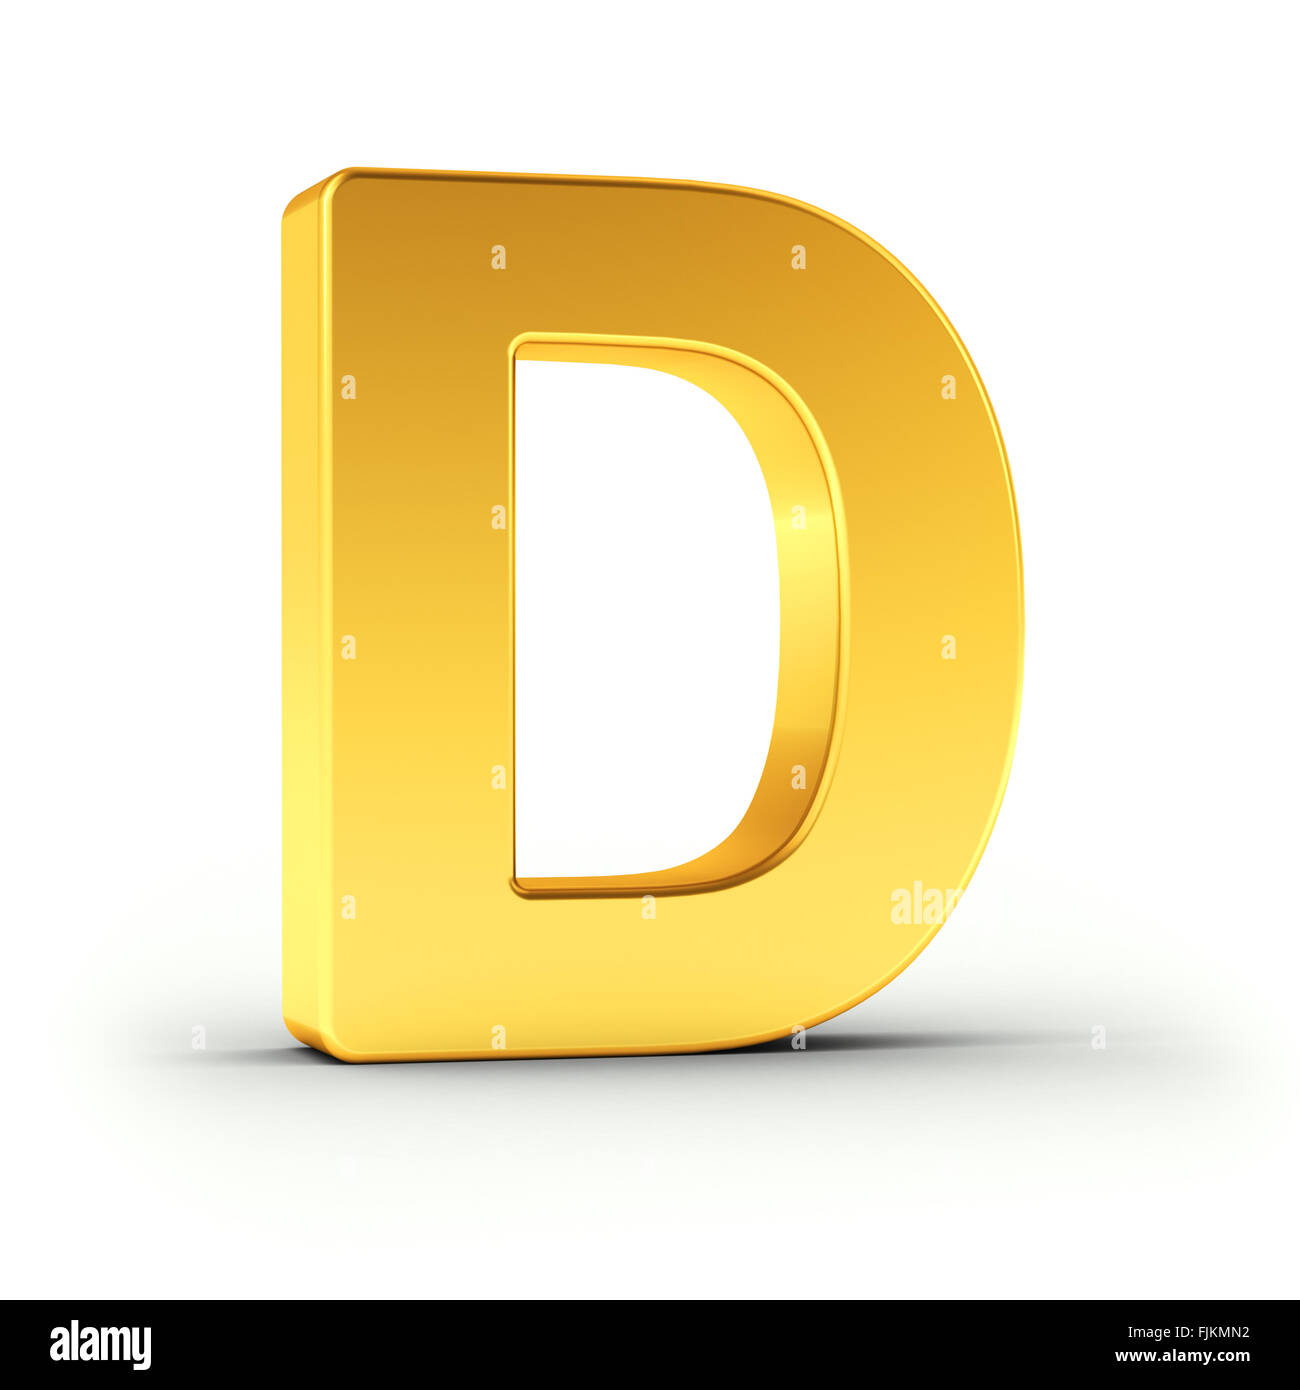 The Letter D as a polished golden object Stock Photo - Alamy